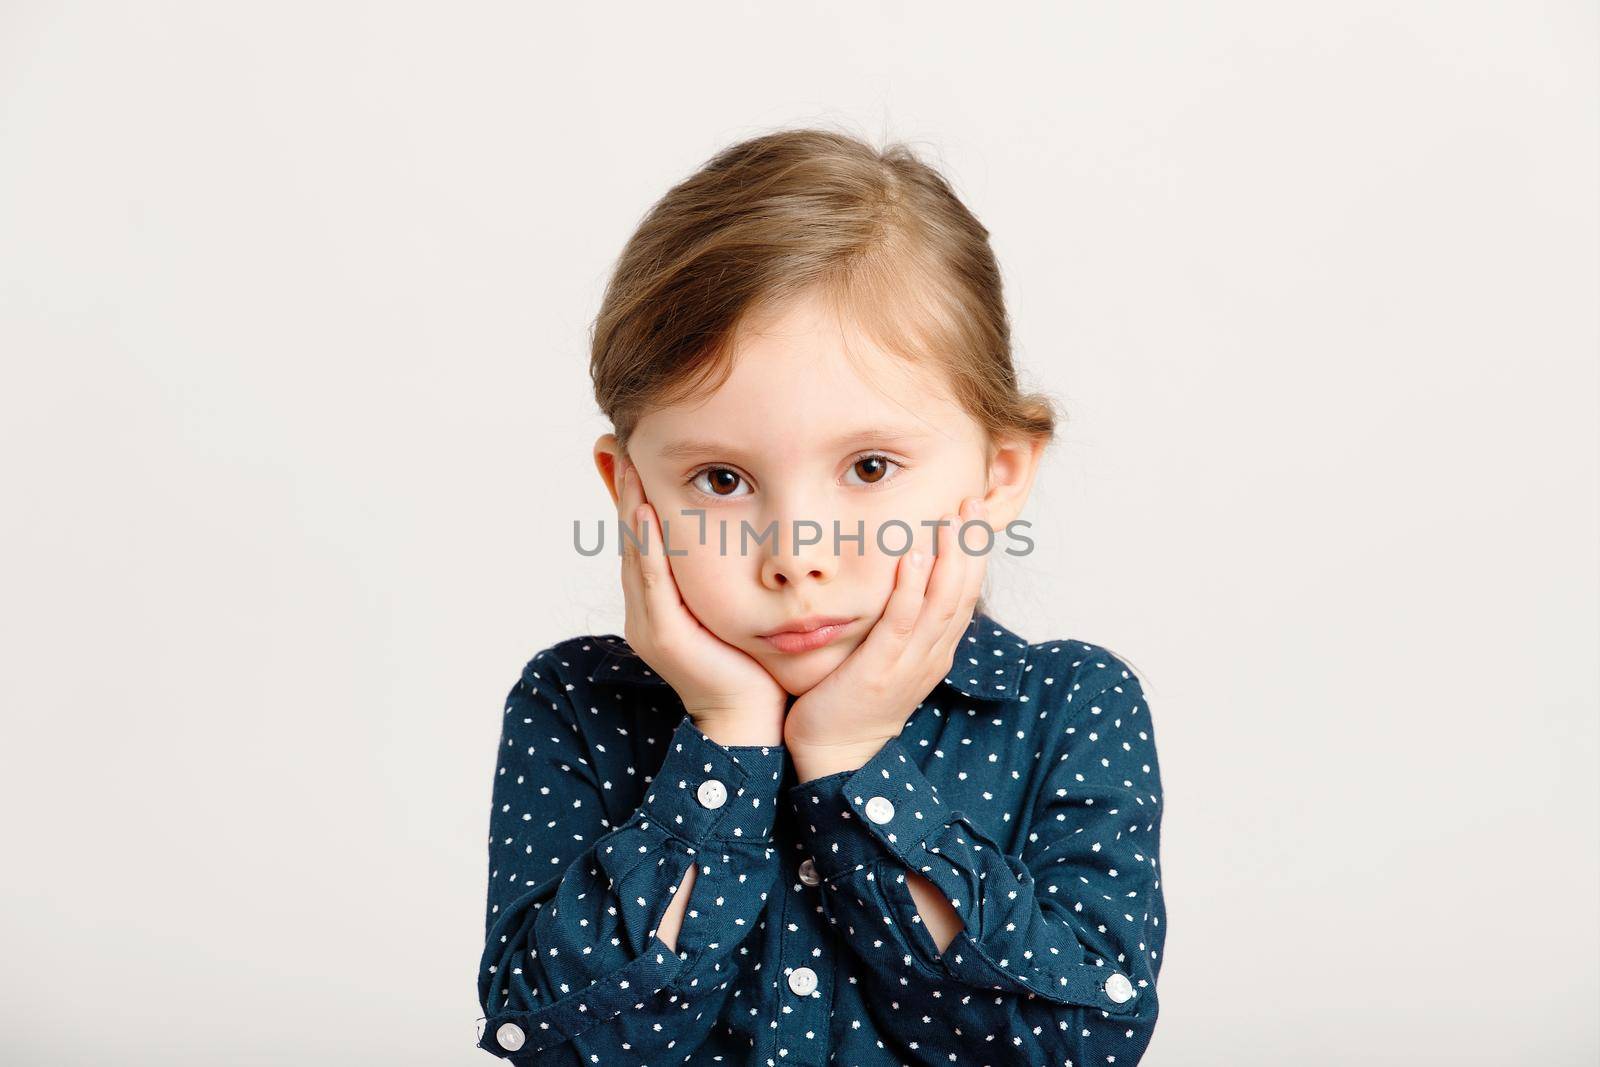 Portrait of an offended, gloomy, angry little girl 4-6 years old wearing a blue dress with polka dots by Rom4ek